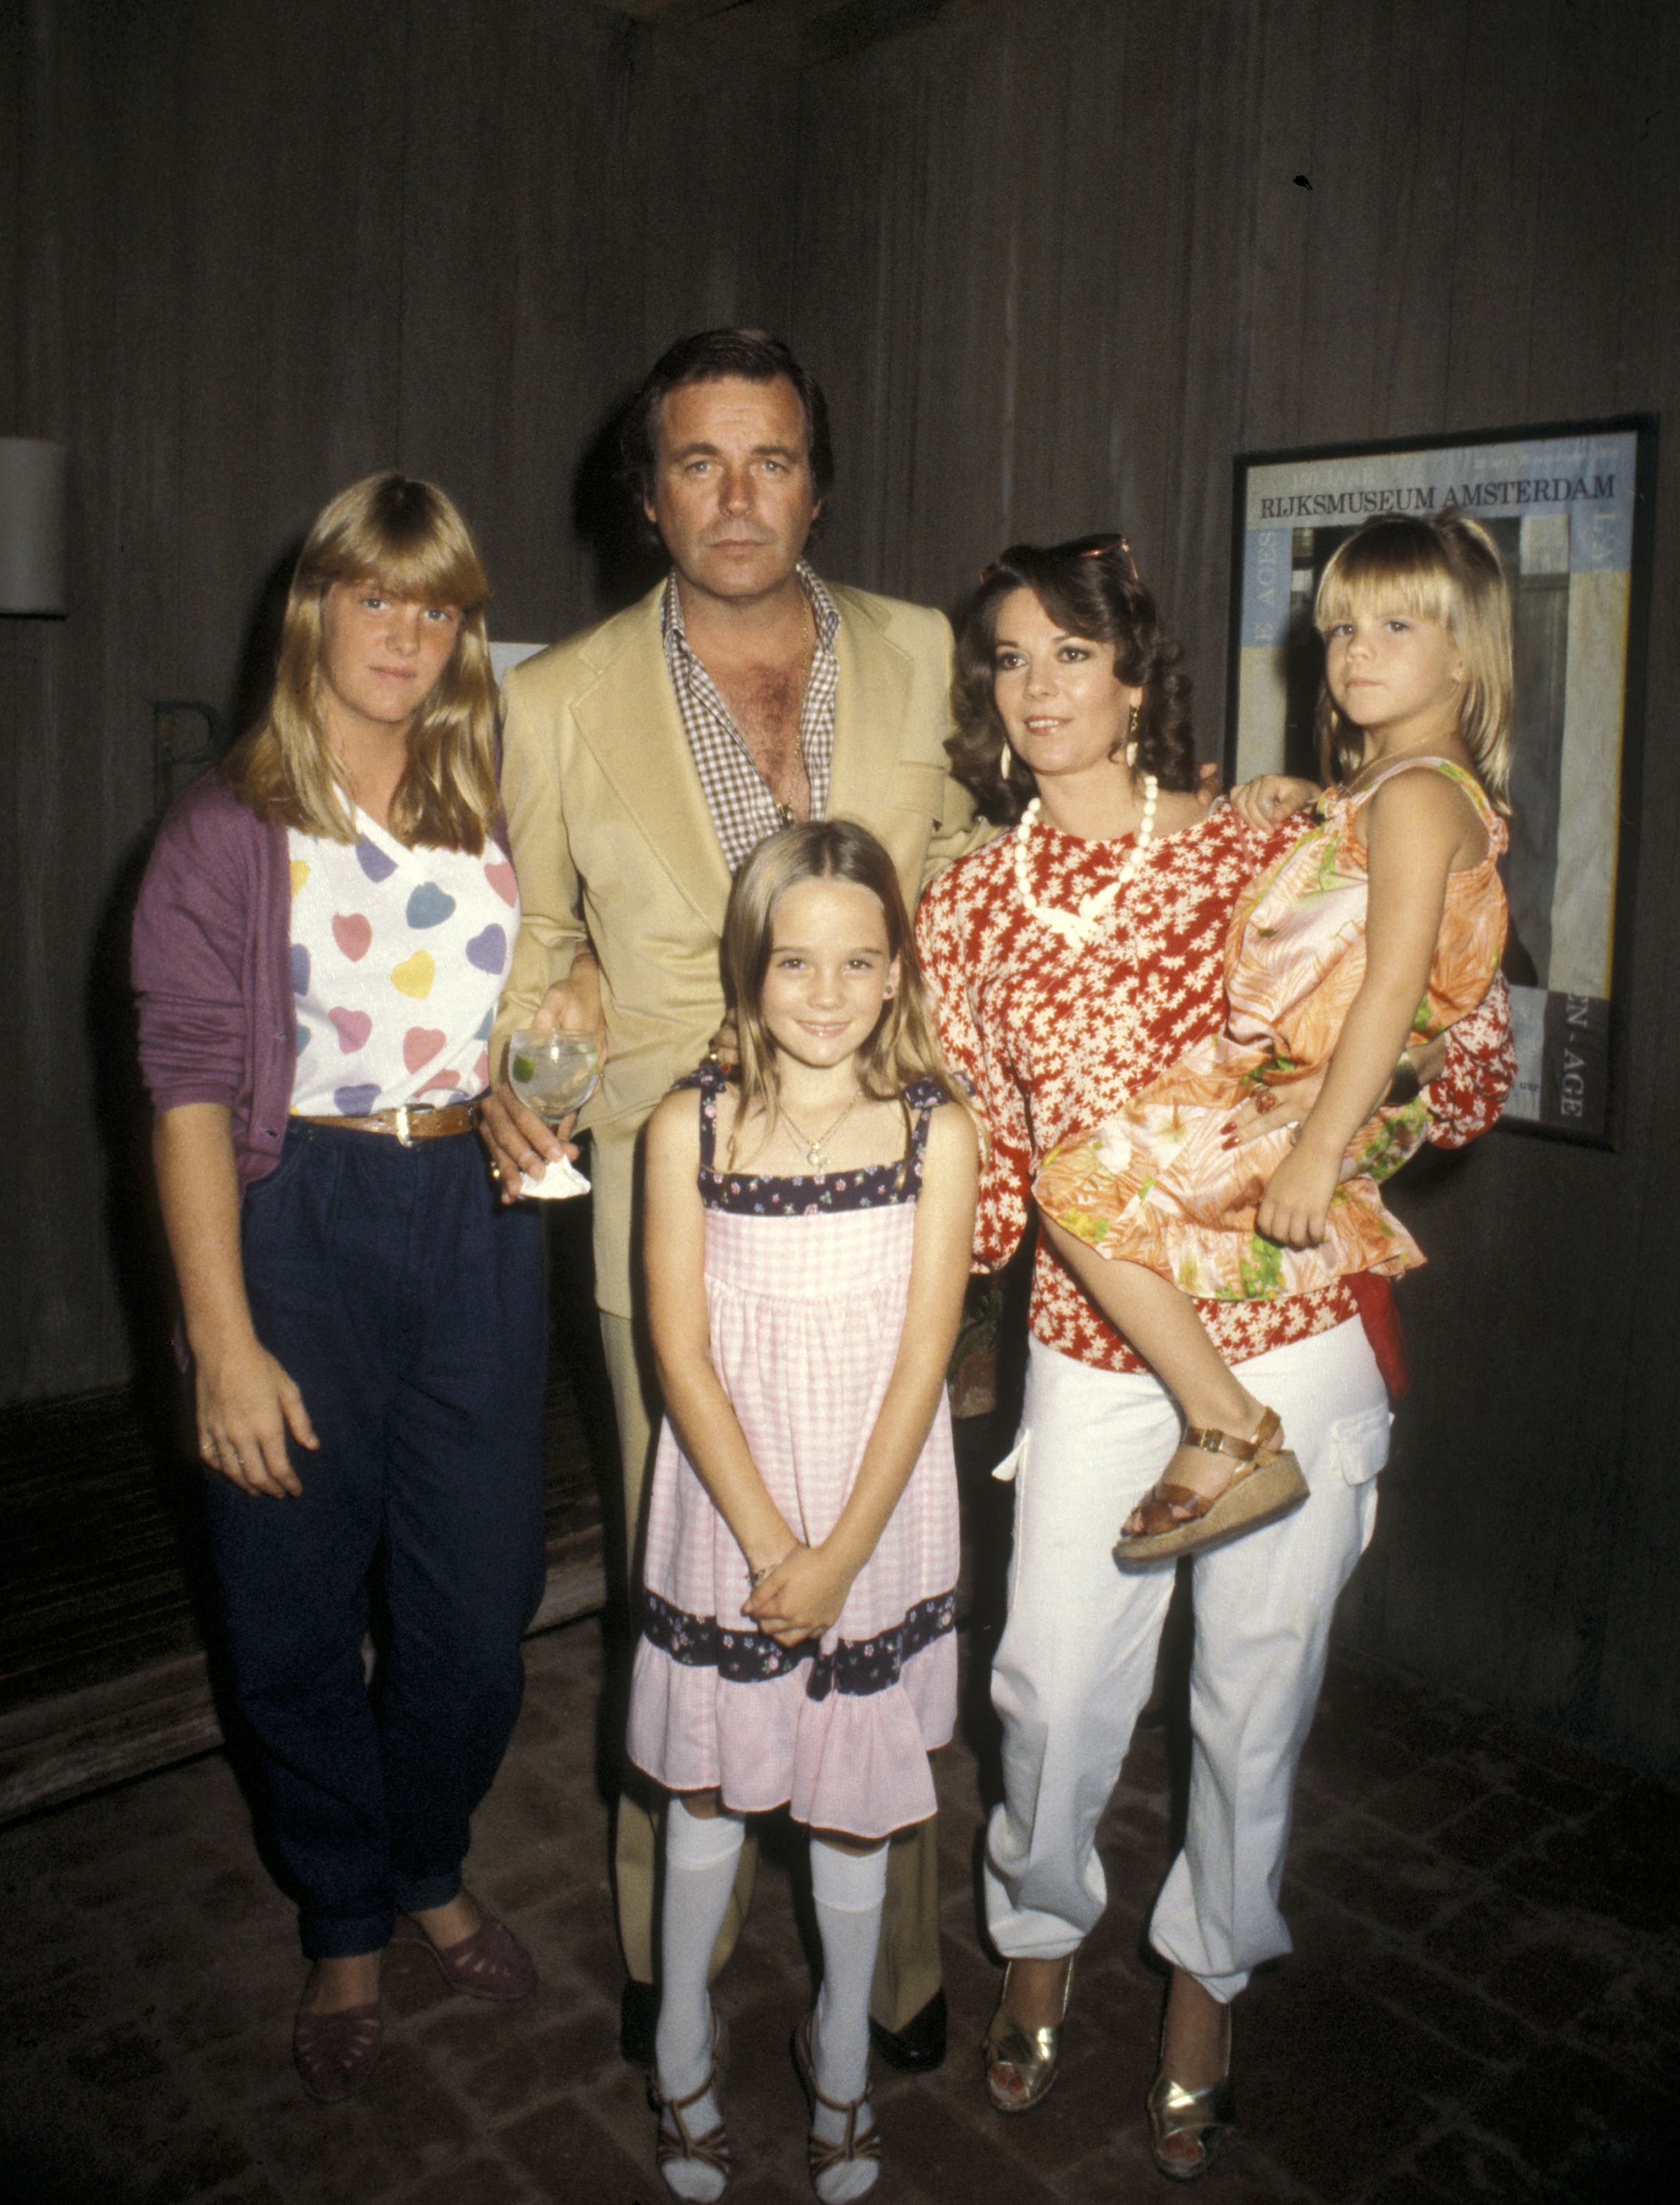 Robert Wagner, Natalie Wood, and Daughters Katie Wagner, Natasha Gregson Wagner, and Courtney Wagner. | Source: Getty Images